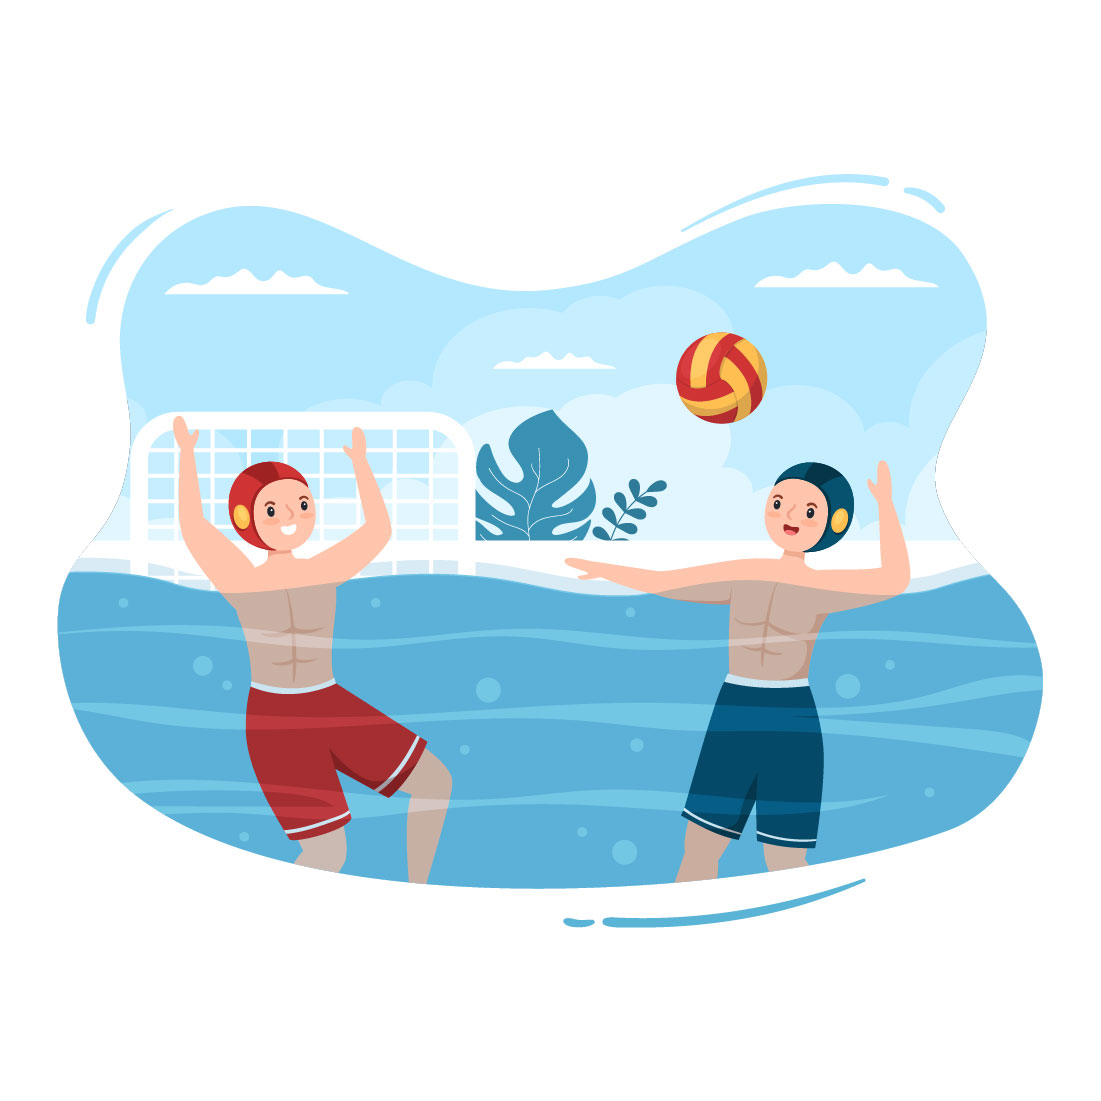 Water Polo Sport Player Design Illustration cover image.